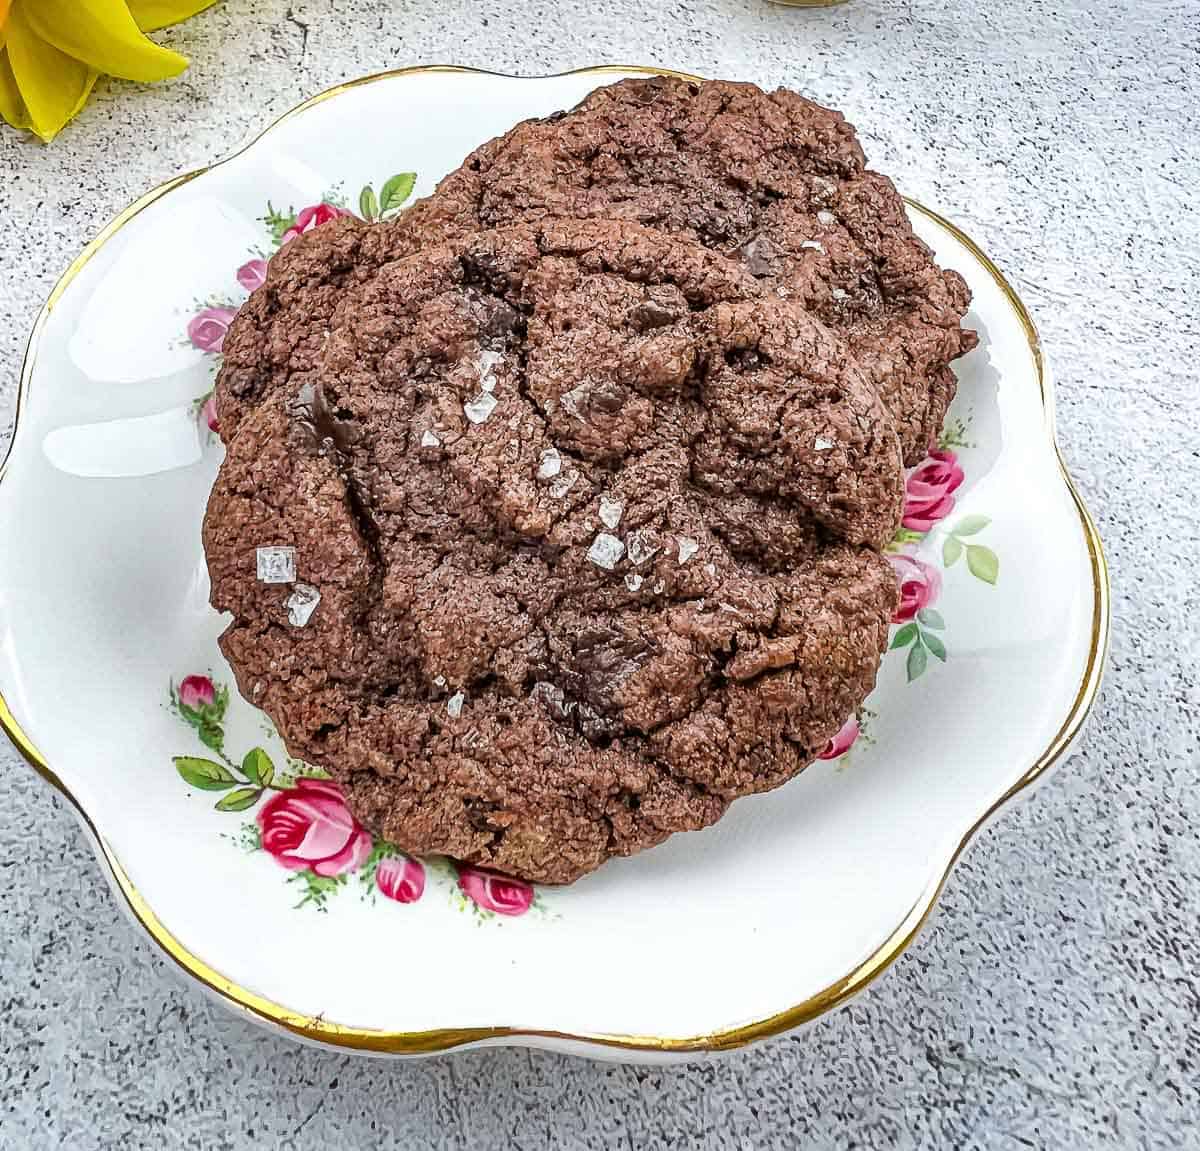 Two Salted Dark Chocolate cookies on a plate next to flowers.